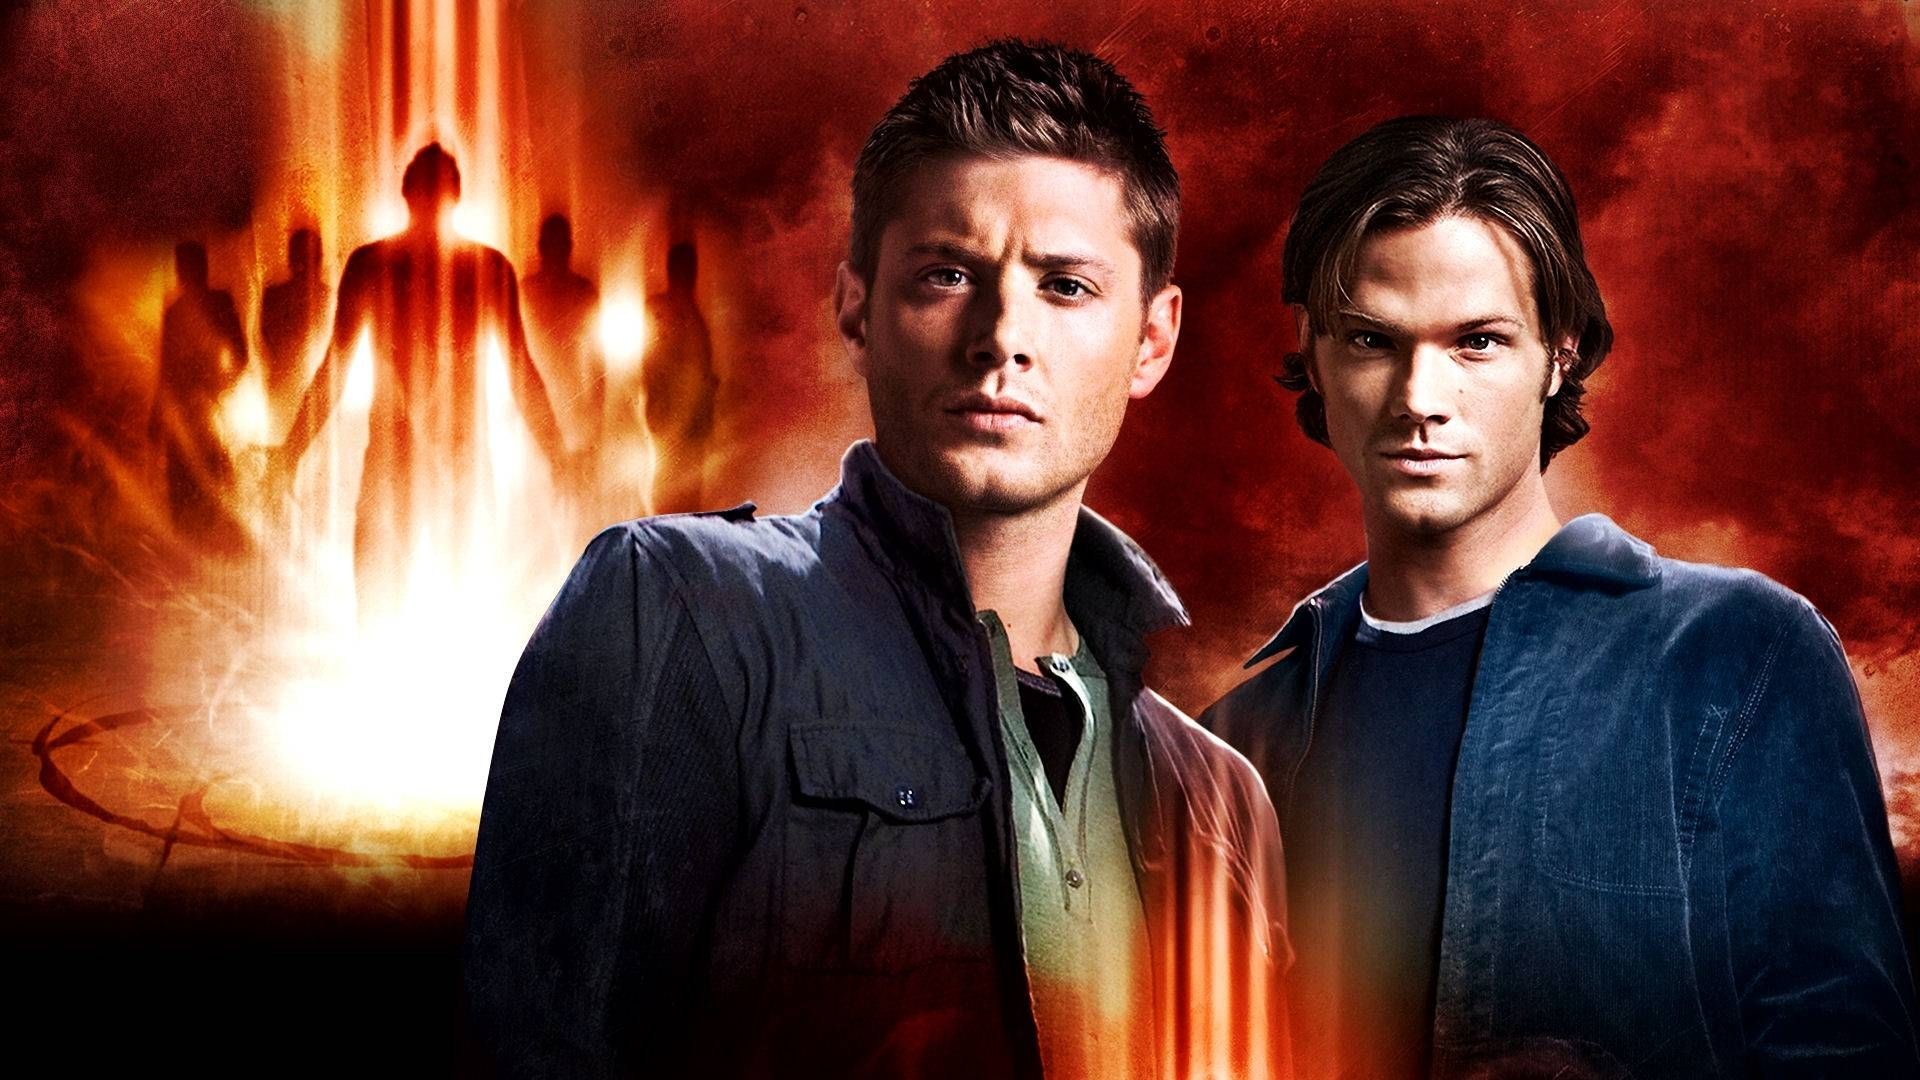 1920x1080 Supernatural #833372 | HD Wallpapers pack download free